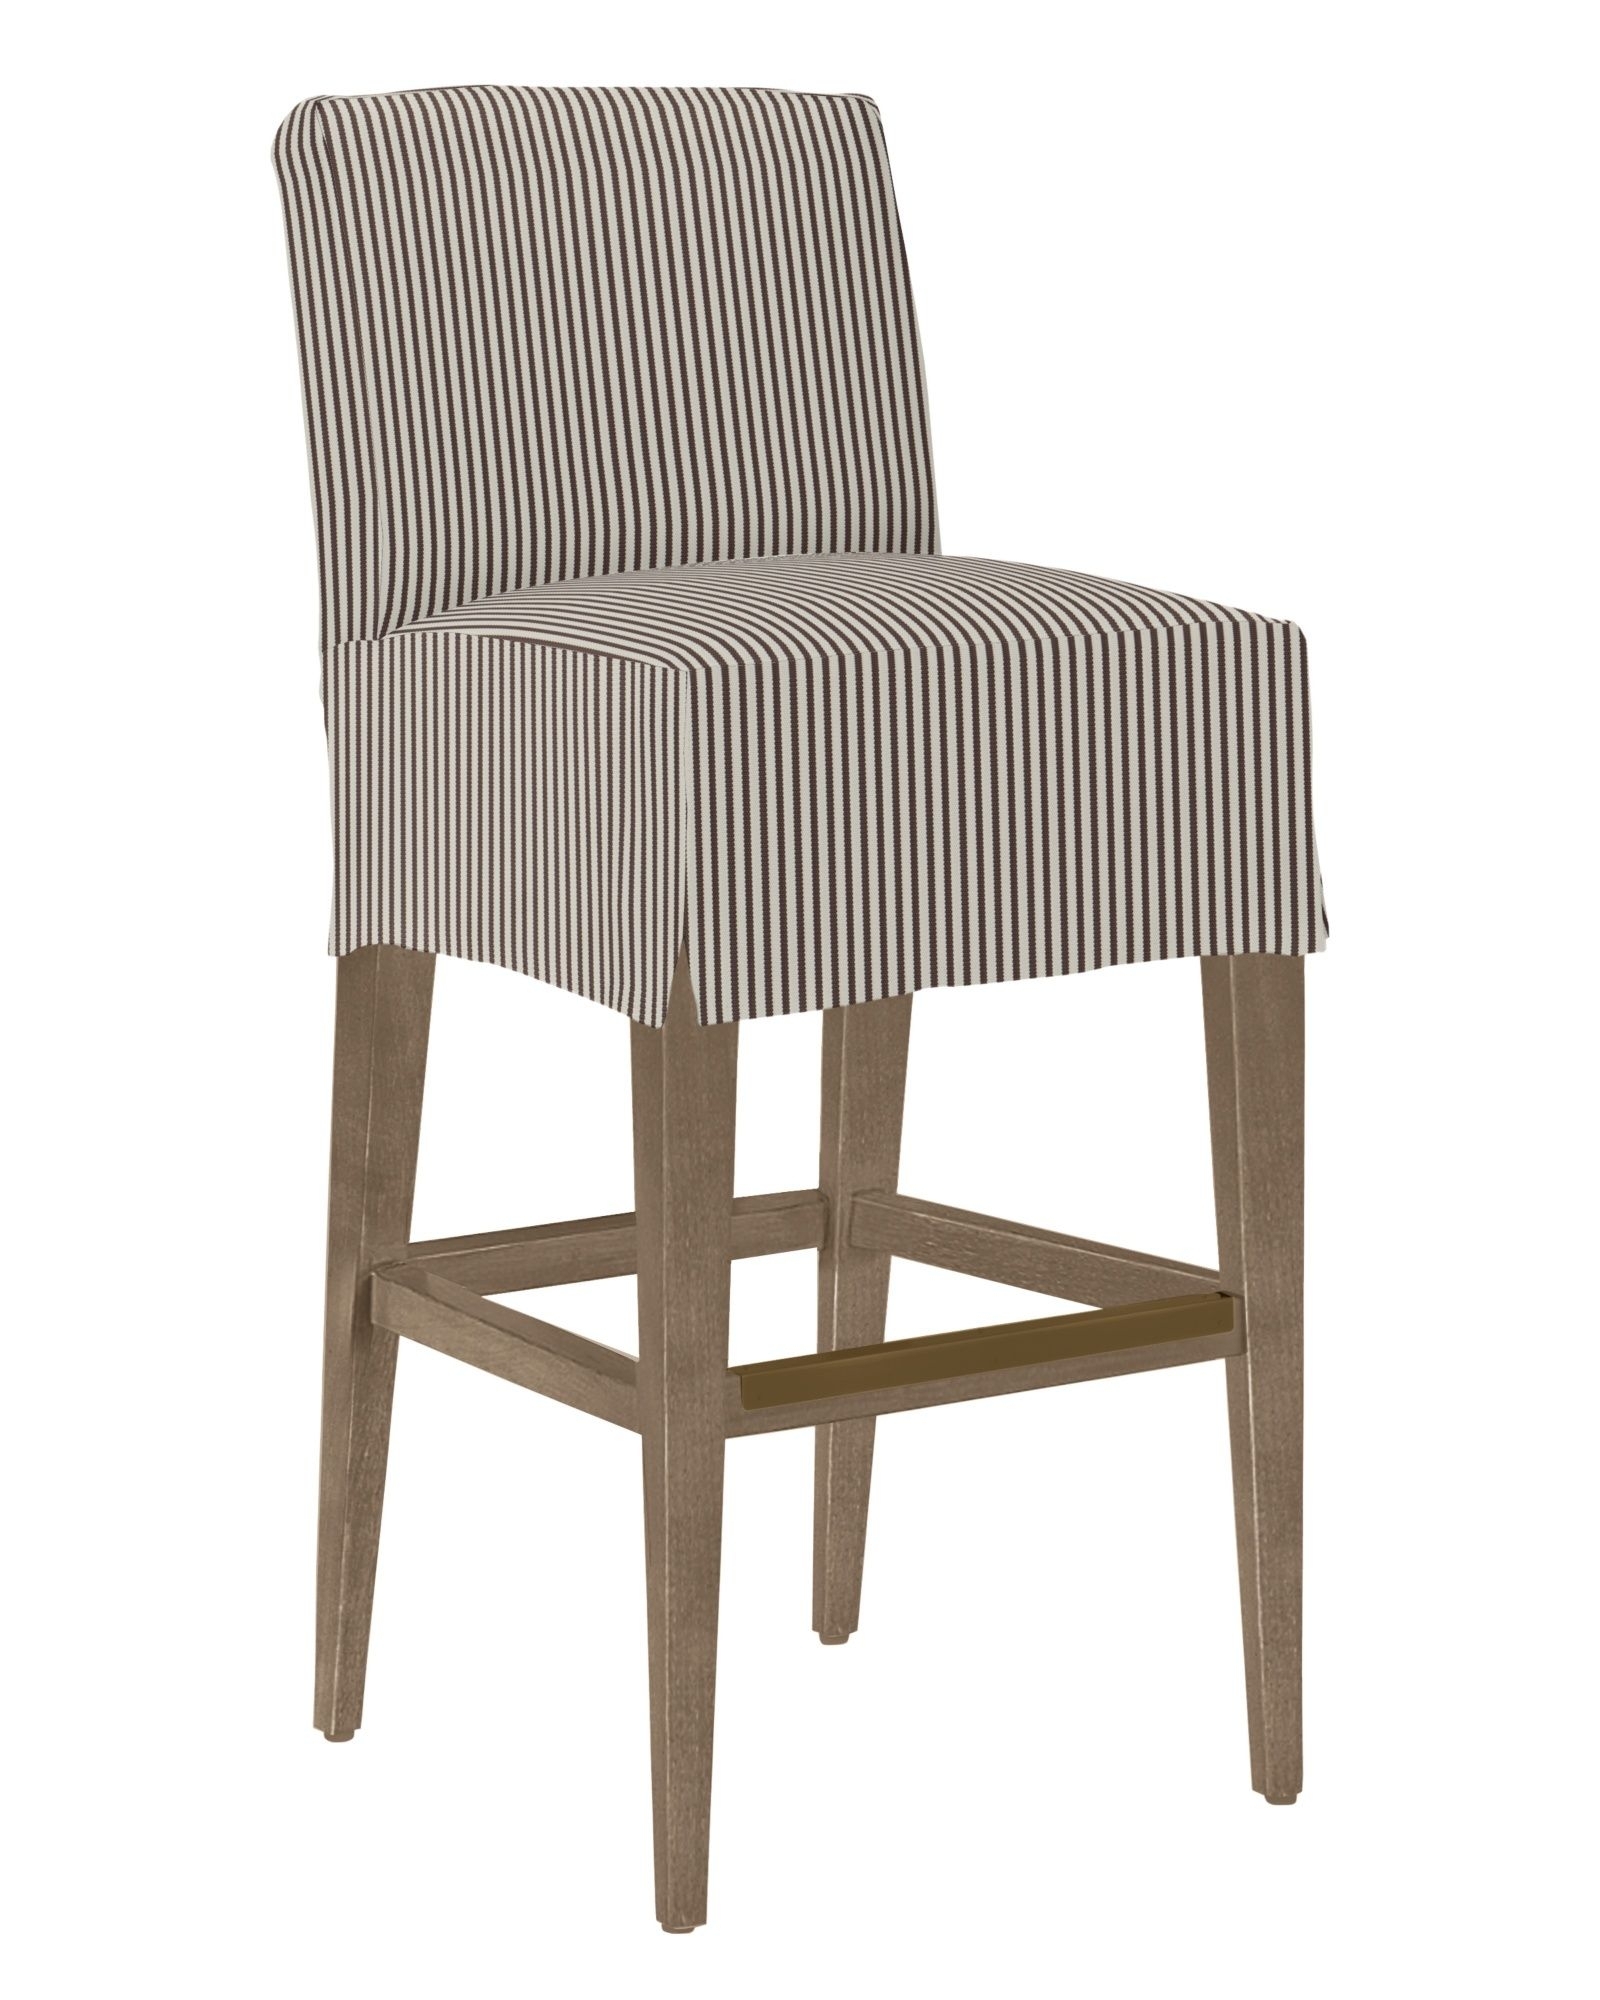 MOCAA Dining Chair Covers,Bar Stool Chair Covers Barstool Slipcovers 2 Pack,M023 Celery